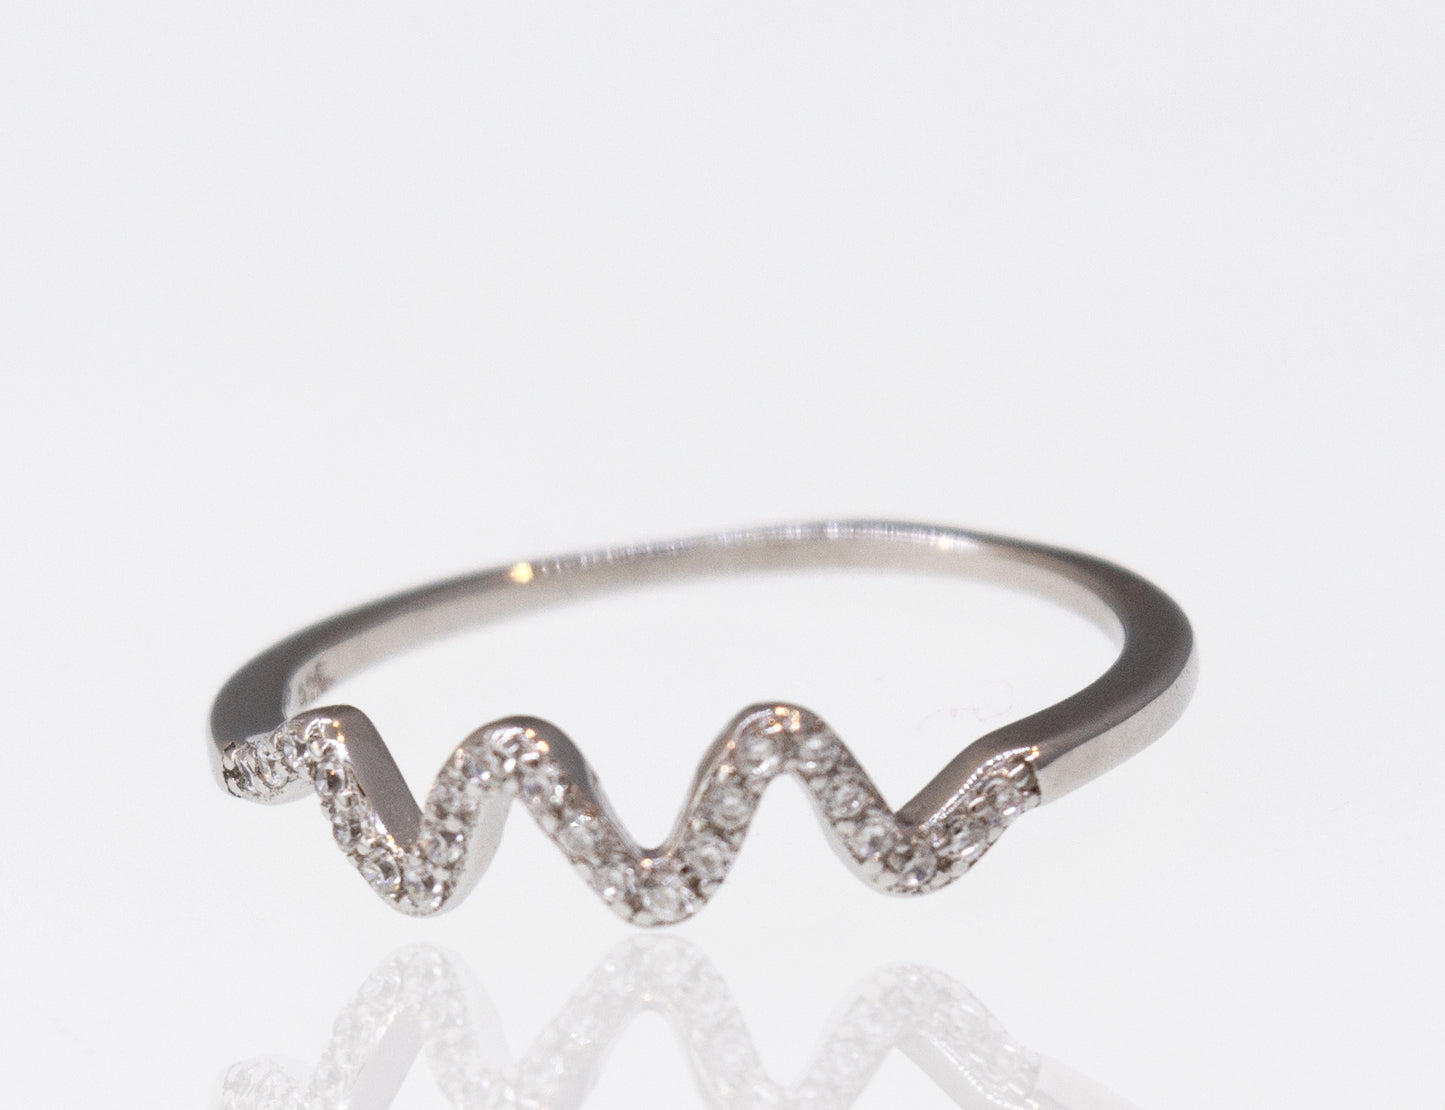 A white gold Wavy Pave Band engagement ring with diamonds on it.